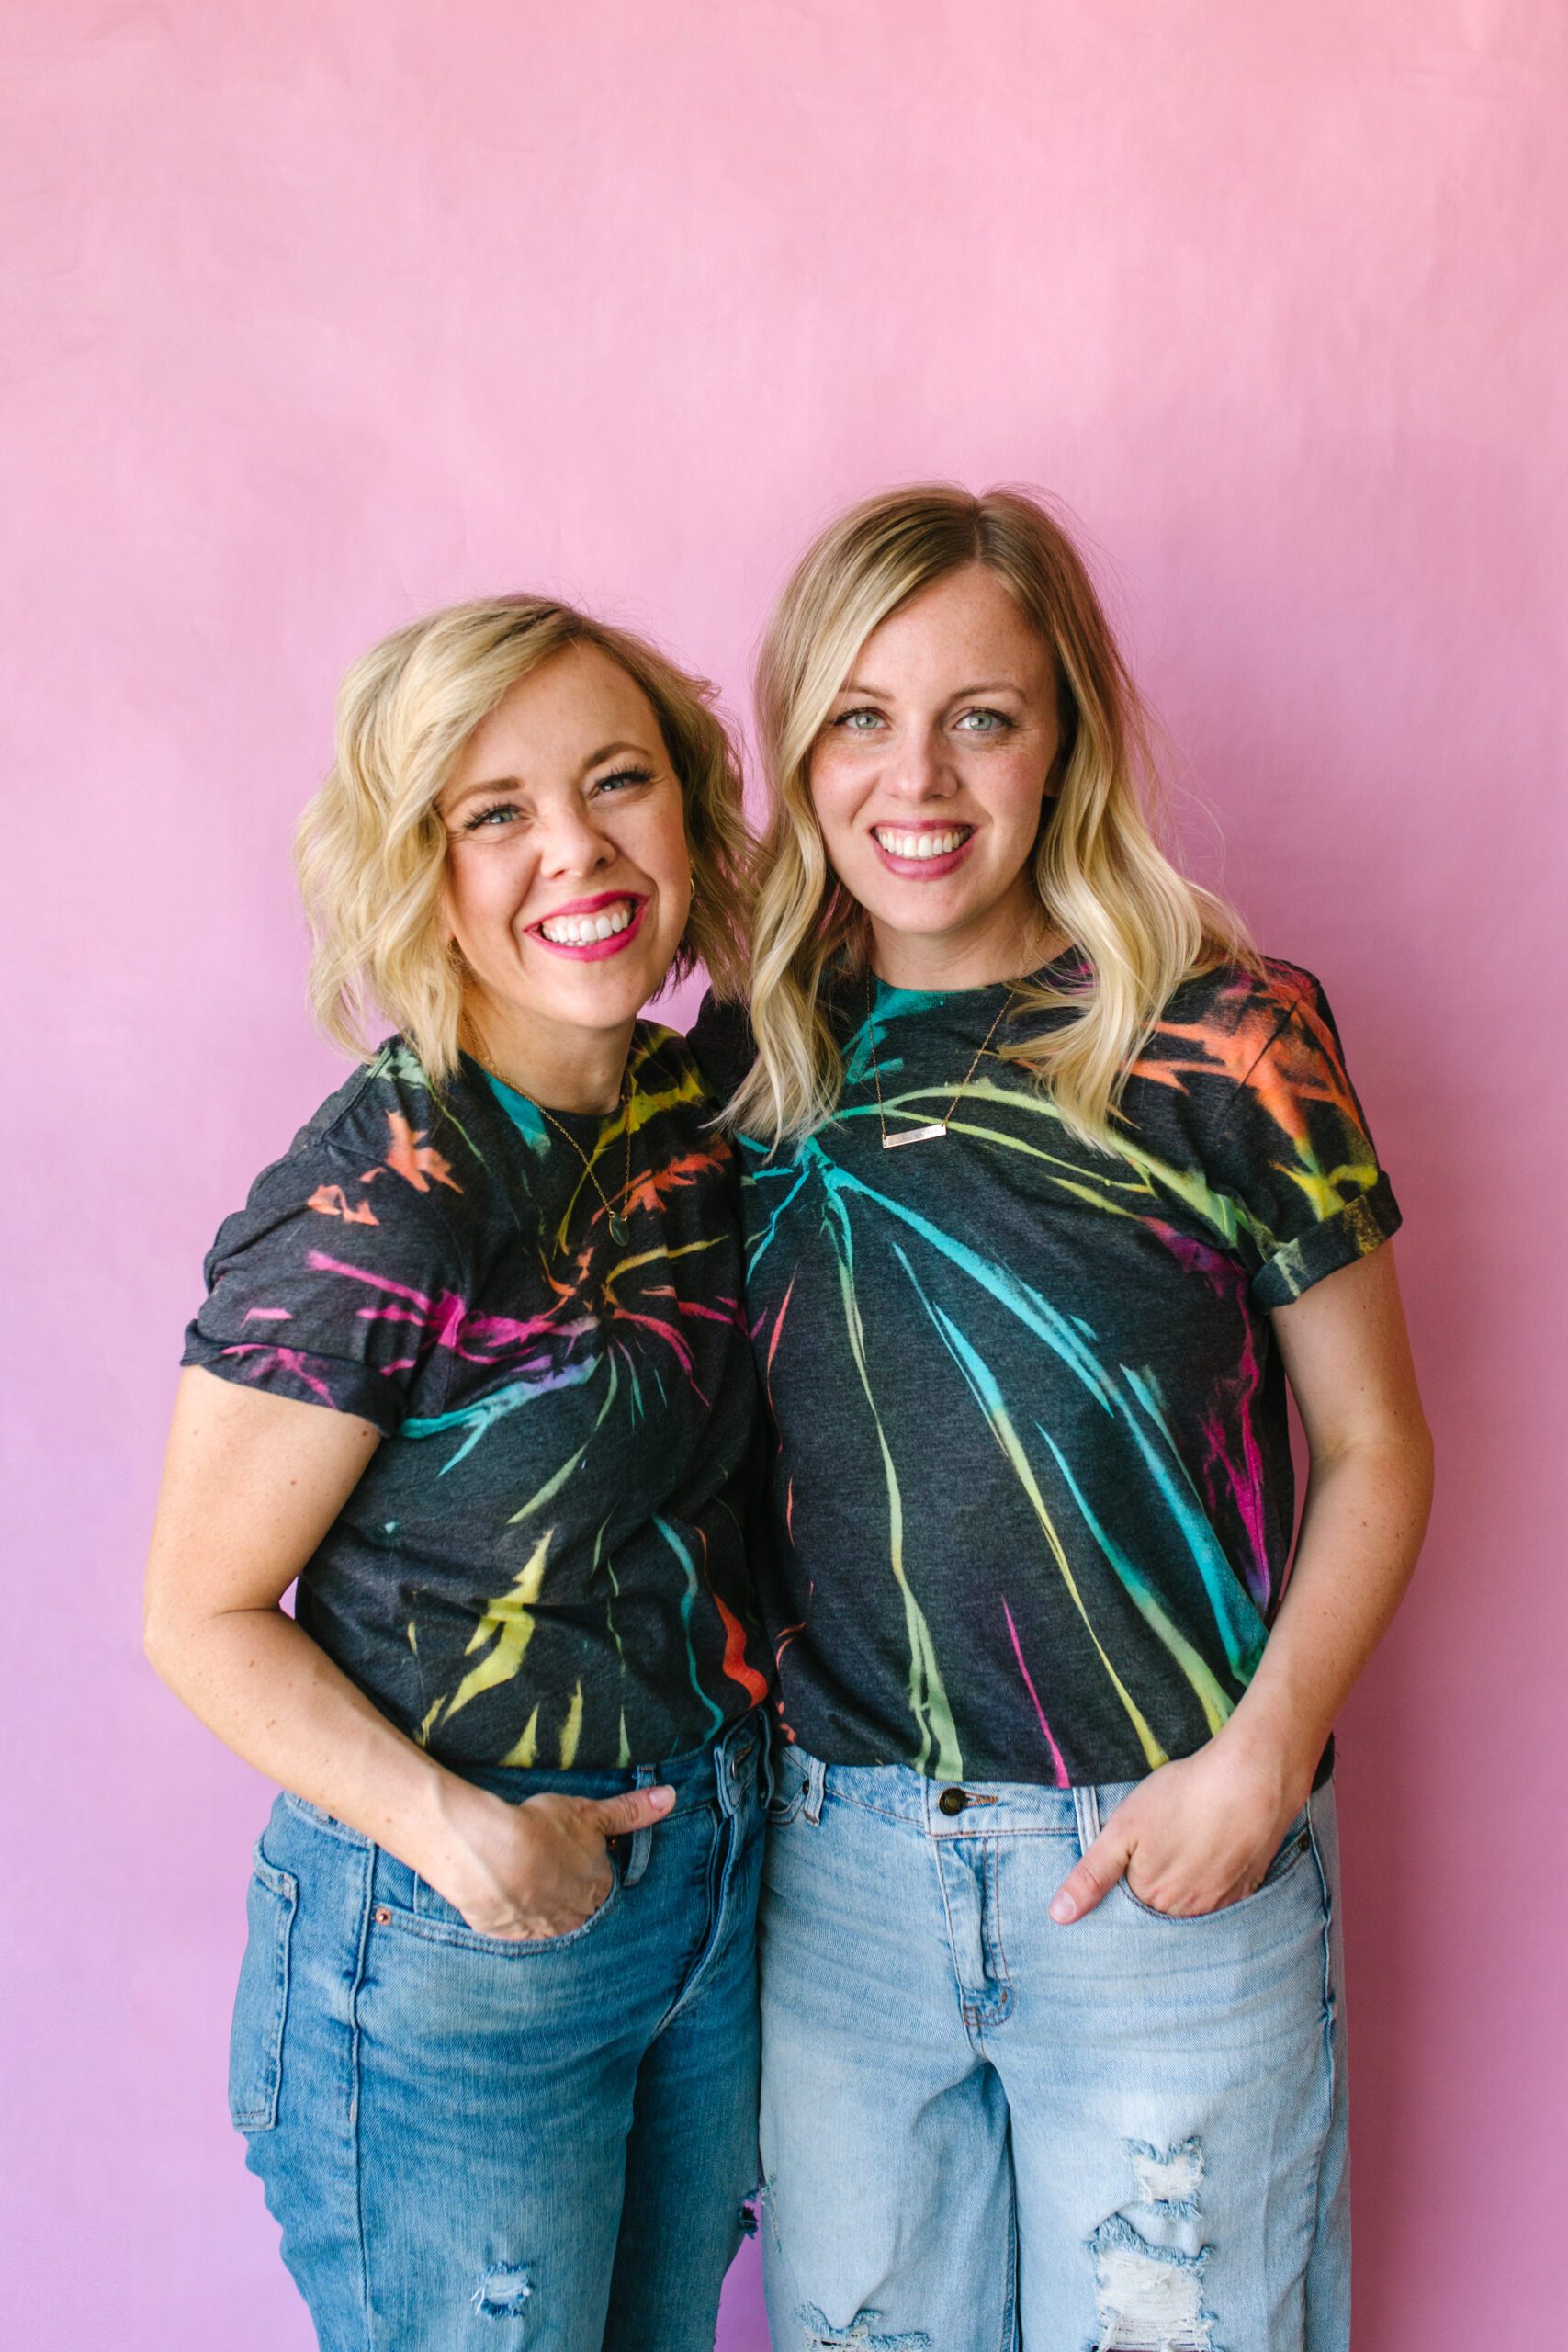 How-To-Tie-Dye-A-Shirt-With-Bleach-Neon-Tie-Dye-Shirts-DIY